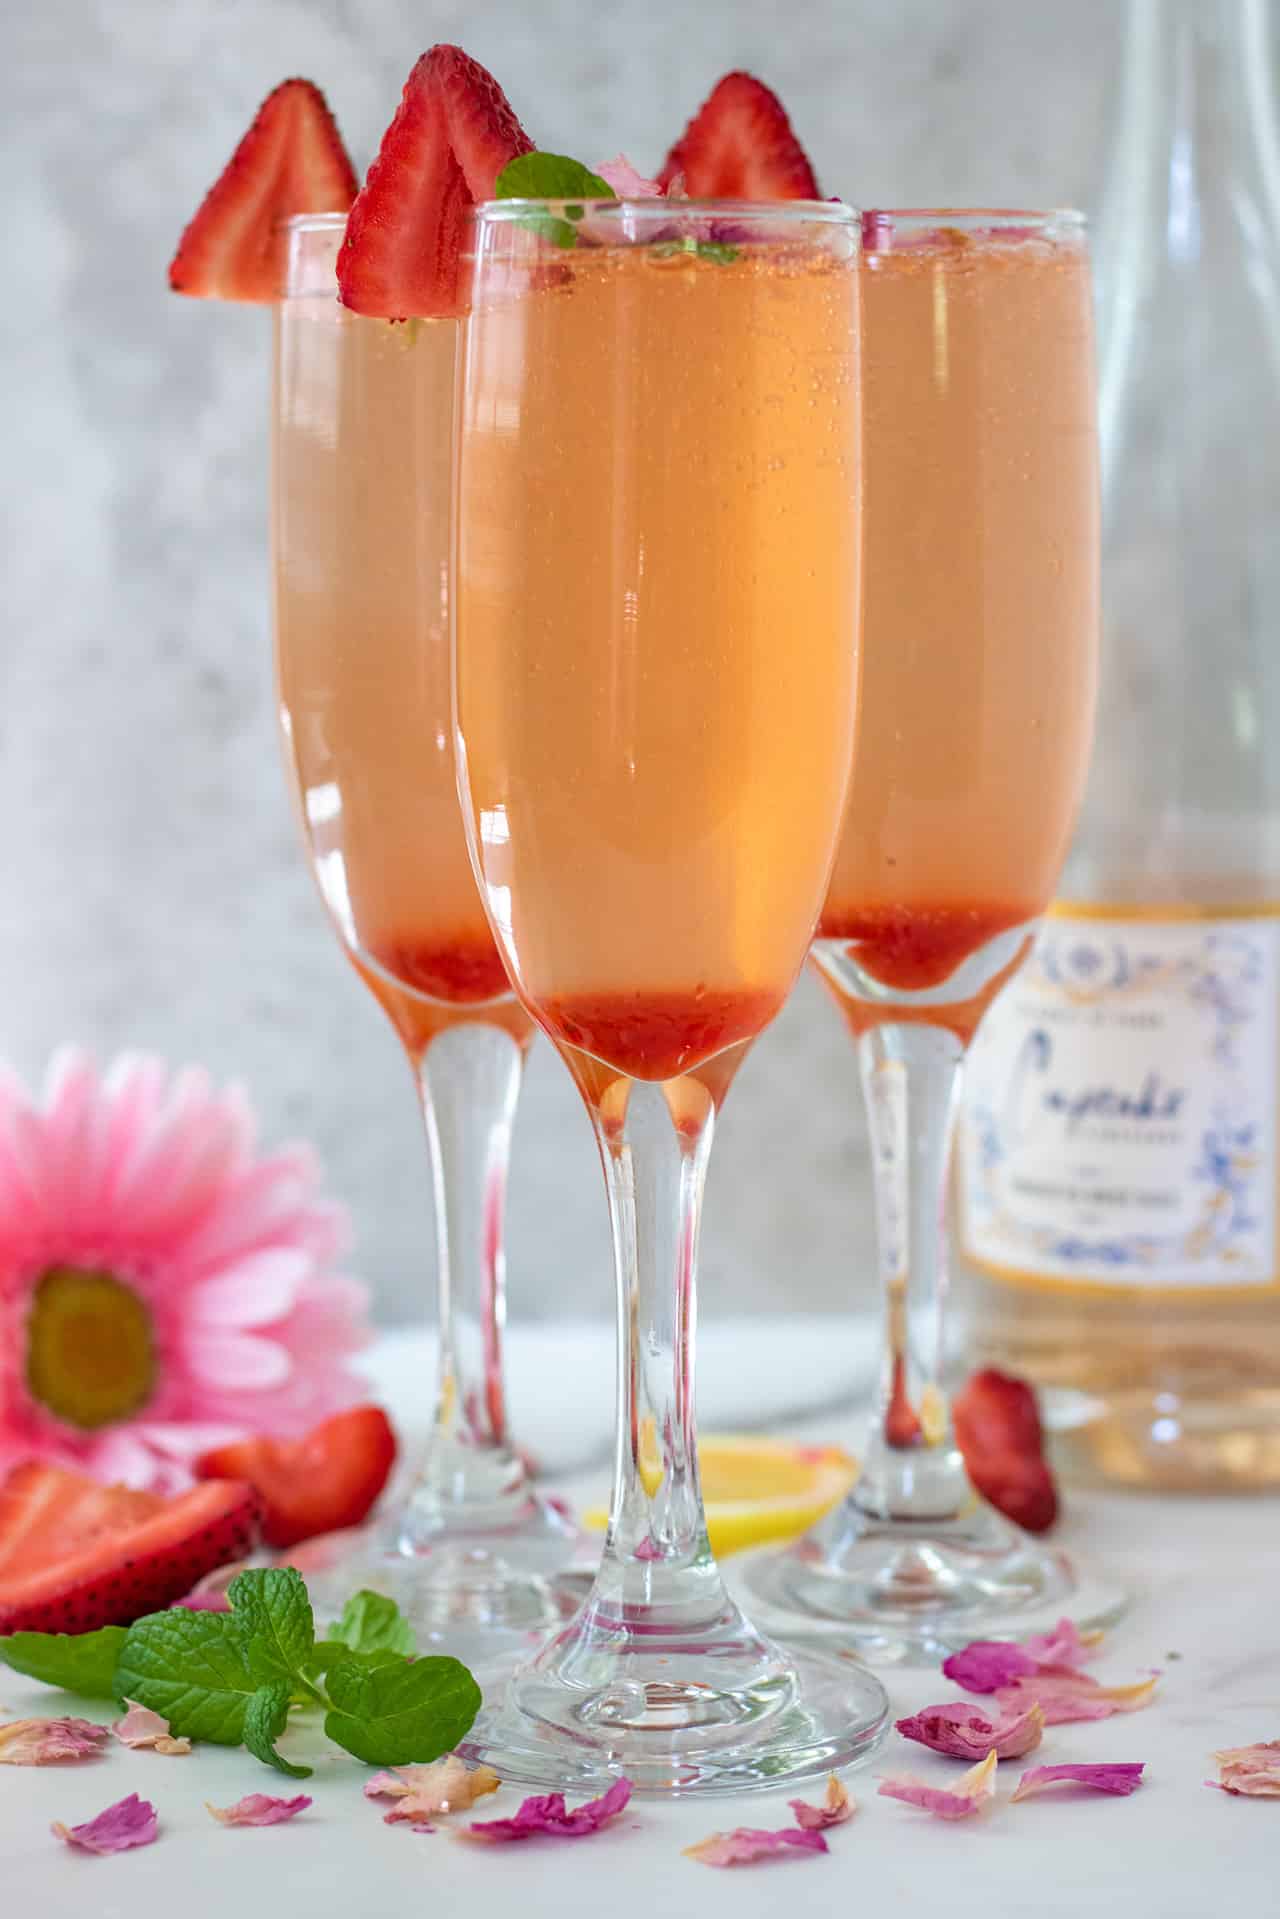 3 champagne flutes filled with strawberry mint syrup and topped with sparkling rosé champagne. There's a bottle of the rosé in the background with a pink daisy flower and fresh strawberries.